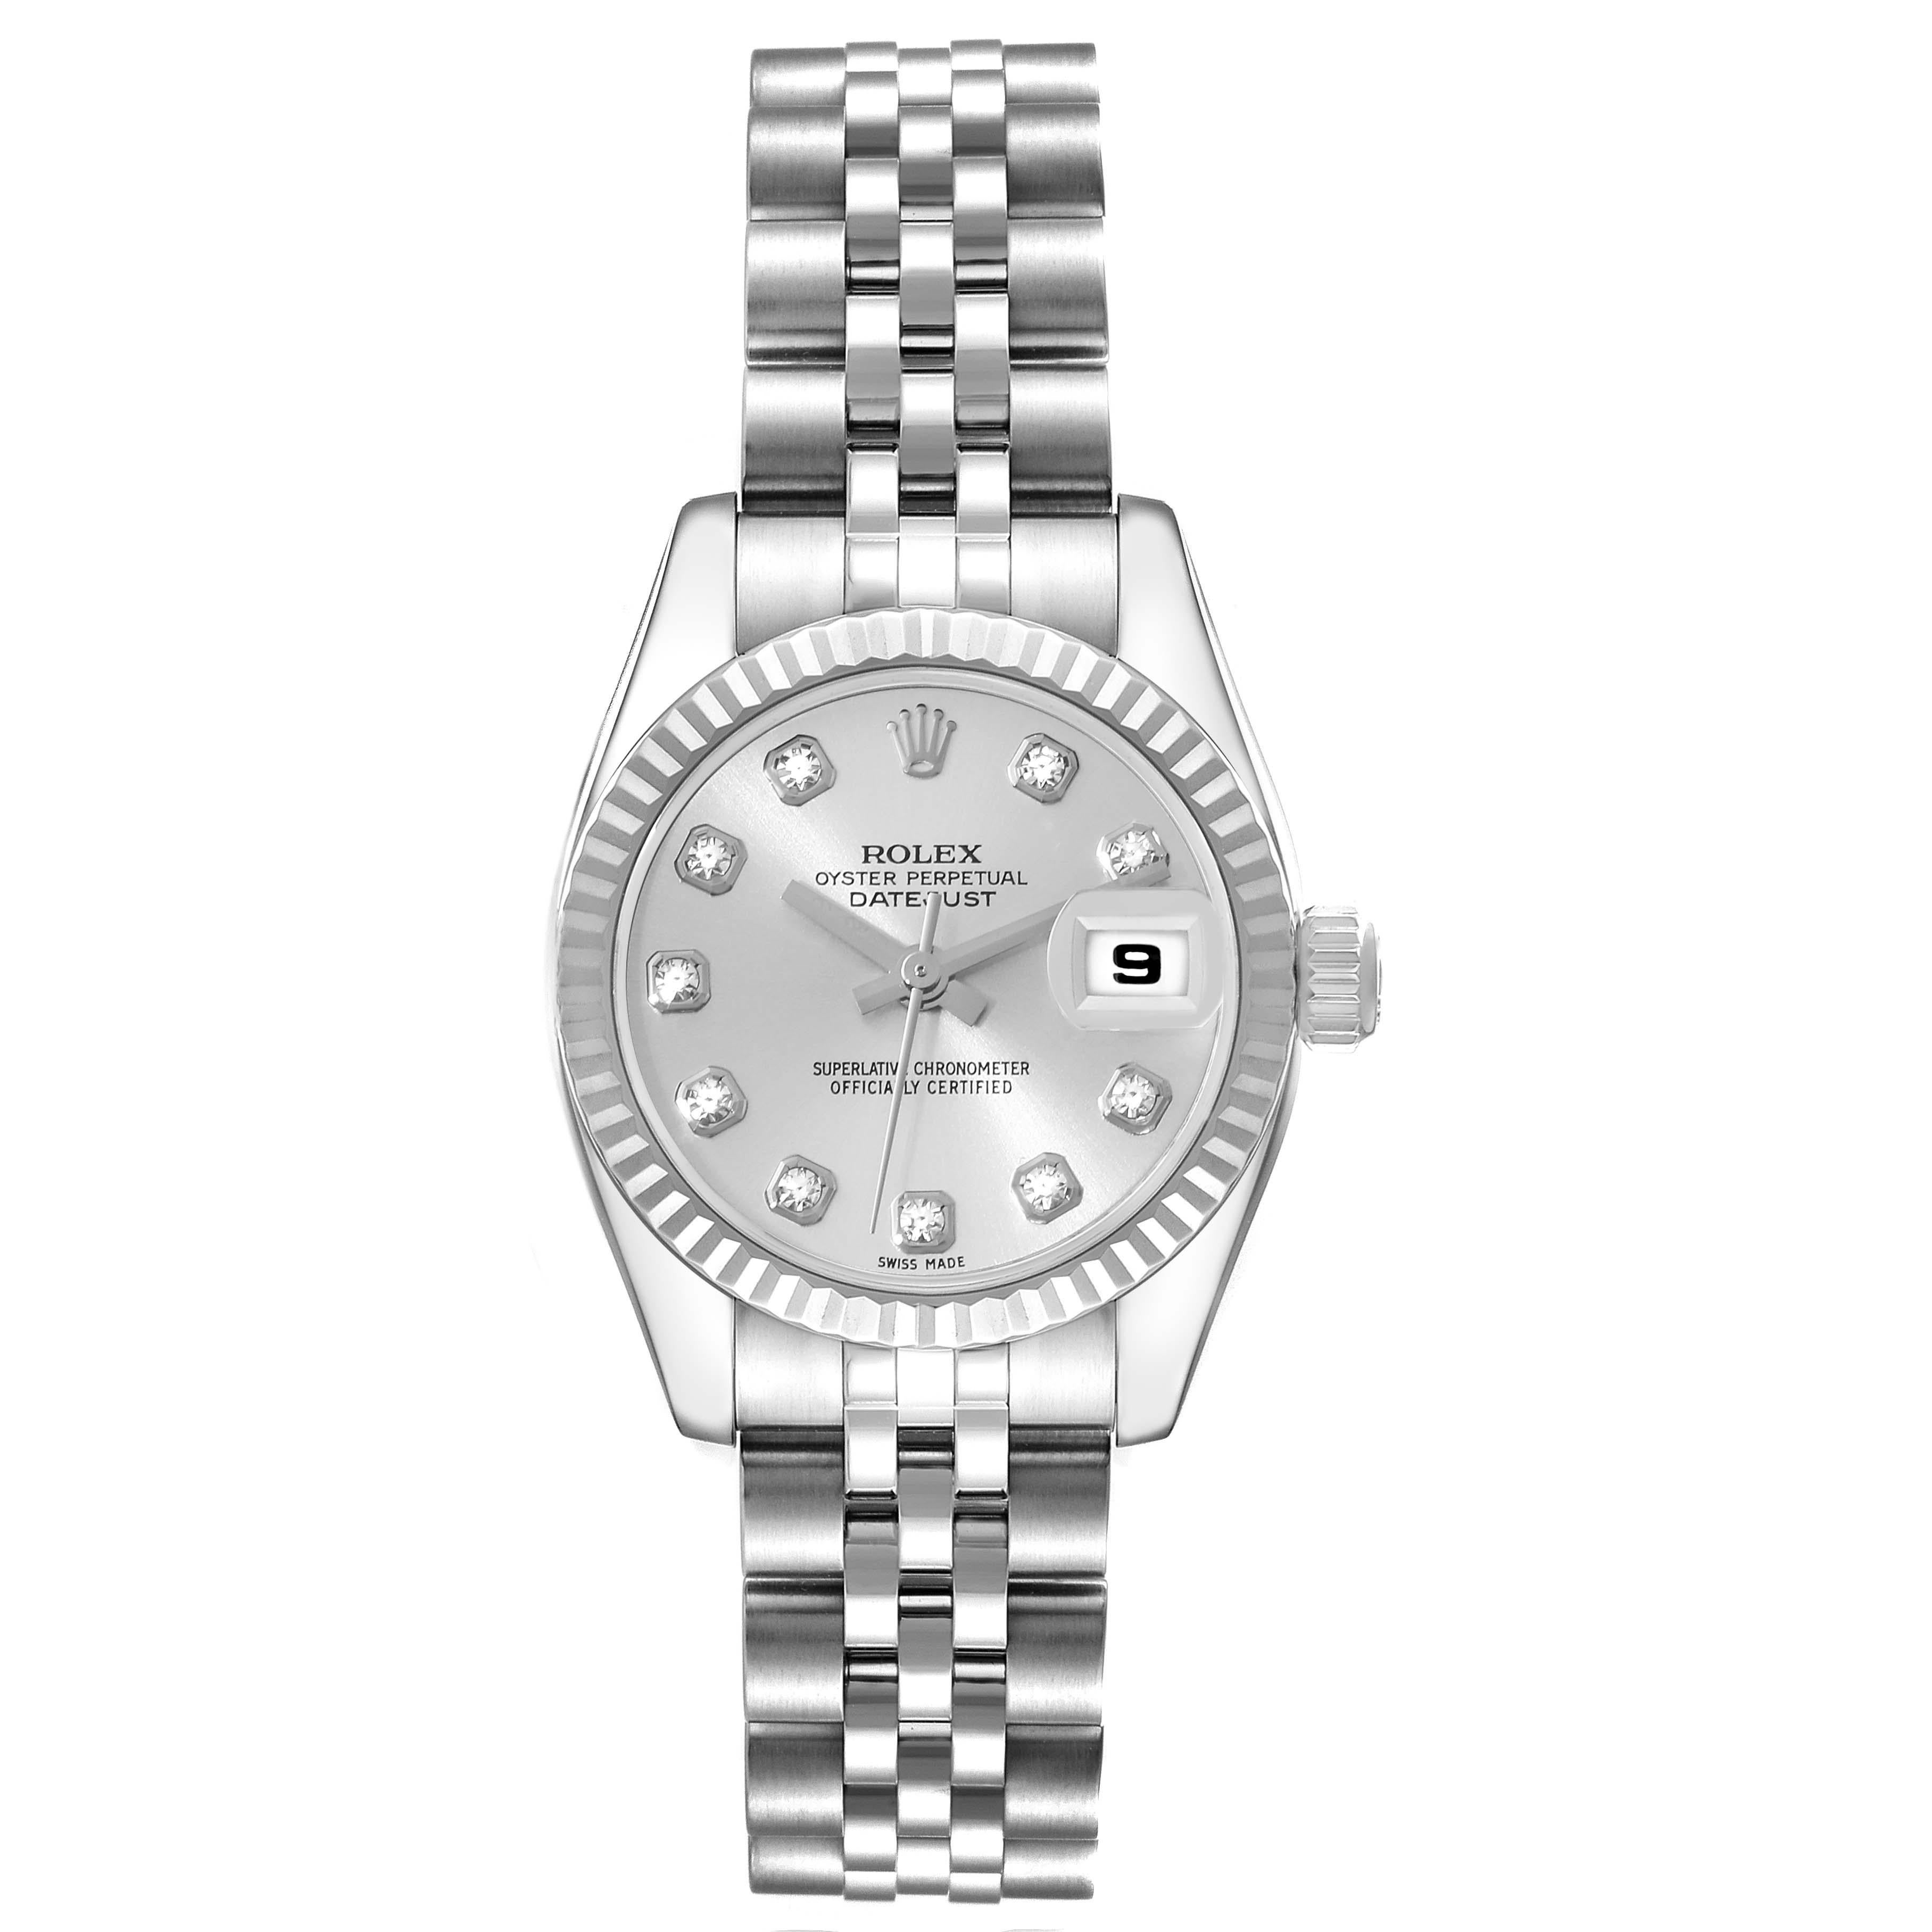 Rolex Datejust Steel White Gold Diamond Dial Ladies Watch 179174 Box Card. Officially certified chronometer automatic self-winding movement. Stainless steel oyster case 26.0 mm in diameter. Rolex logo on the crown. 18K white gold fluted bezel.